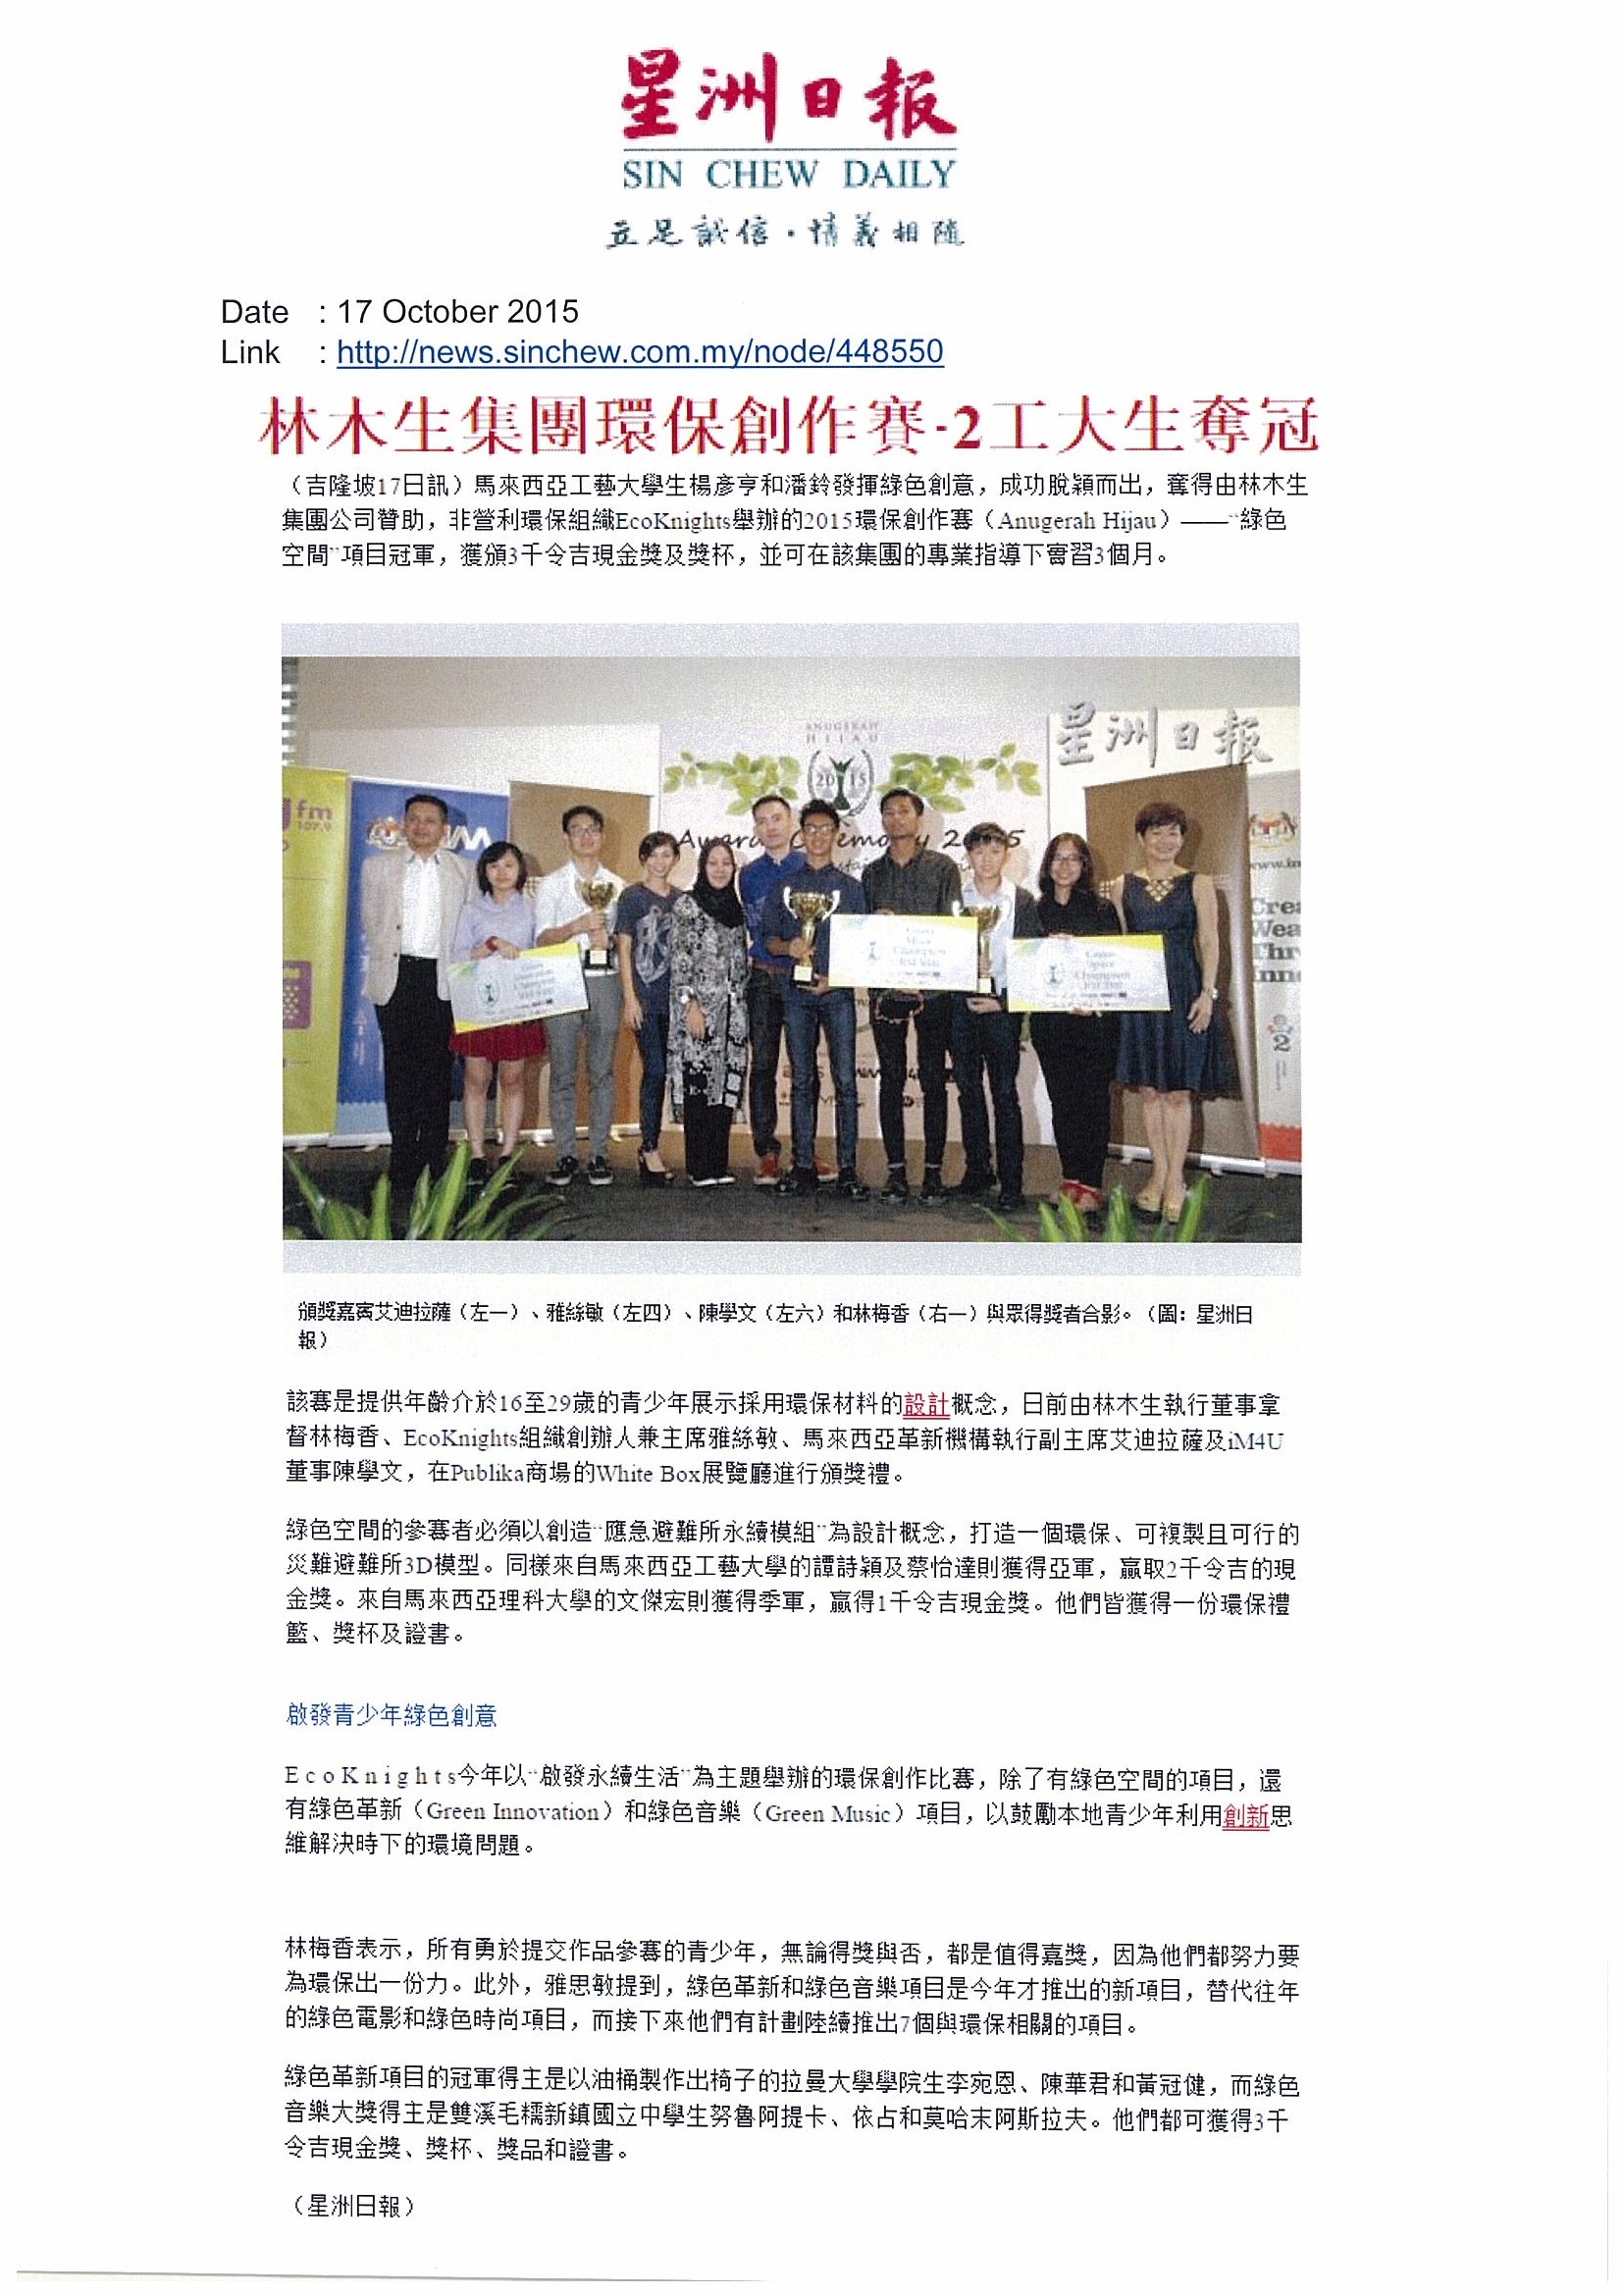 2015.10.17 Sin Chew Online – 2 UTM Student won in Anugerah Hijau competition